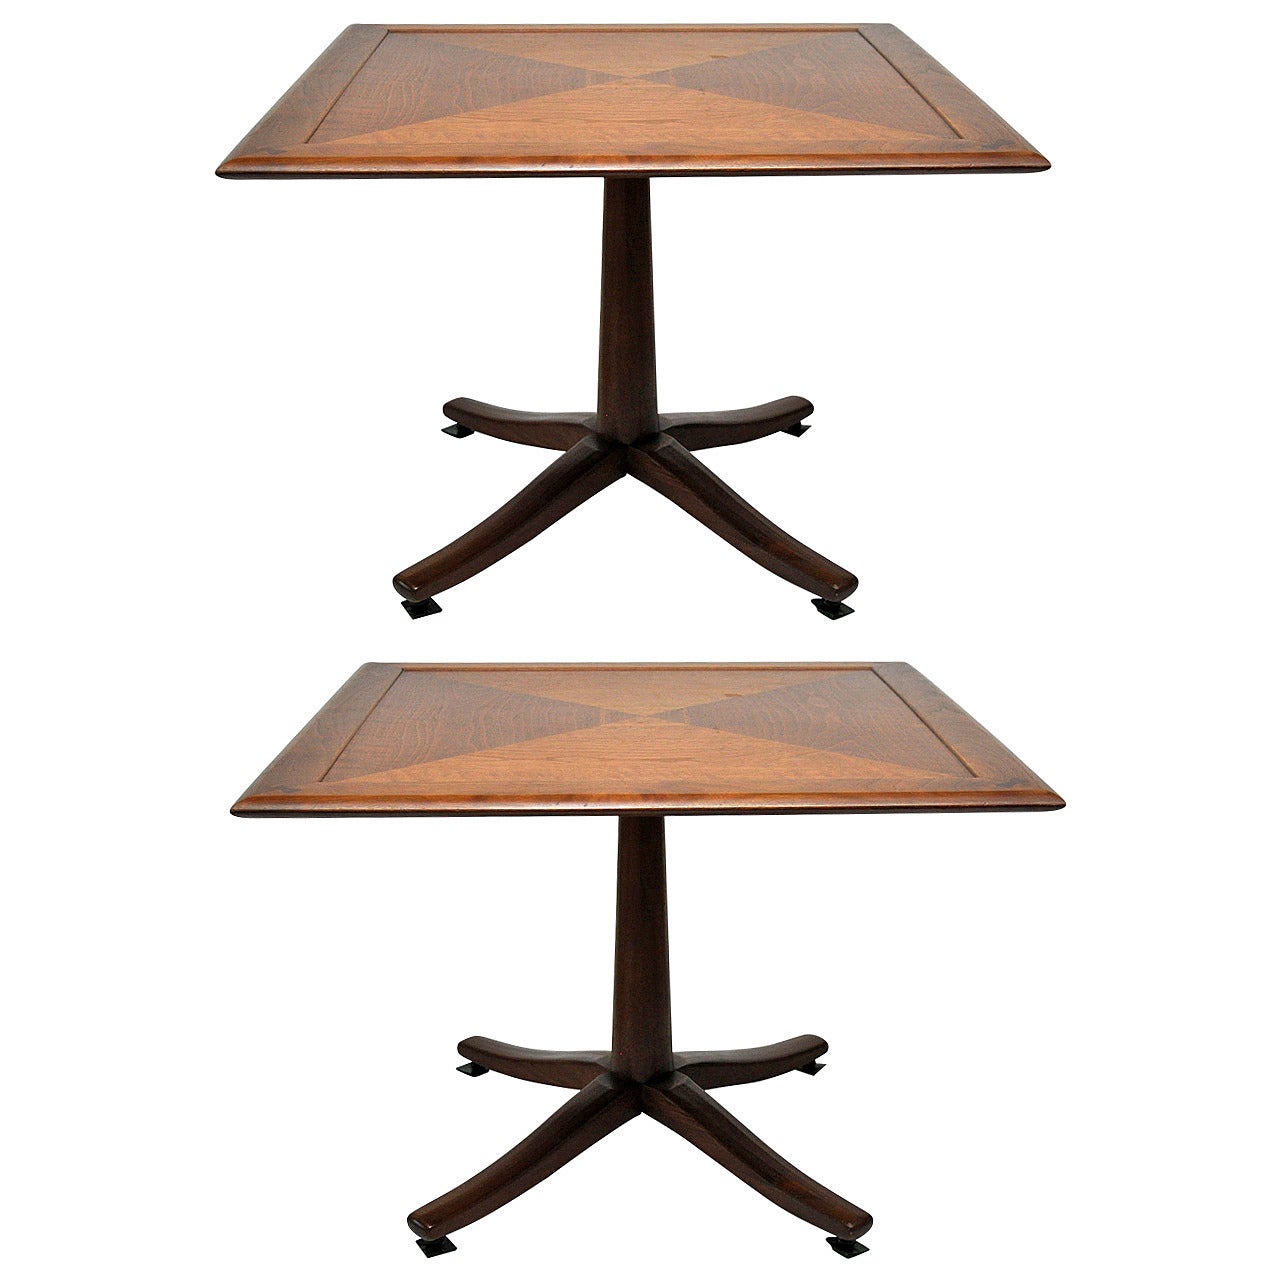 Pair of Midcentury Occasional Tables by Drexel Heritage Furniture